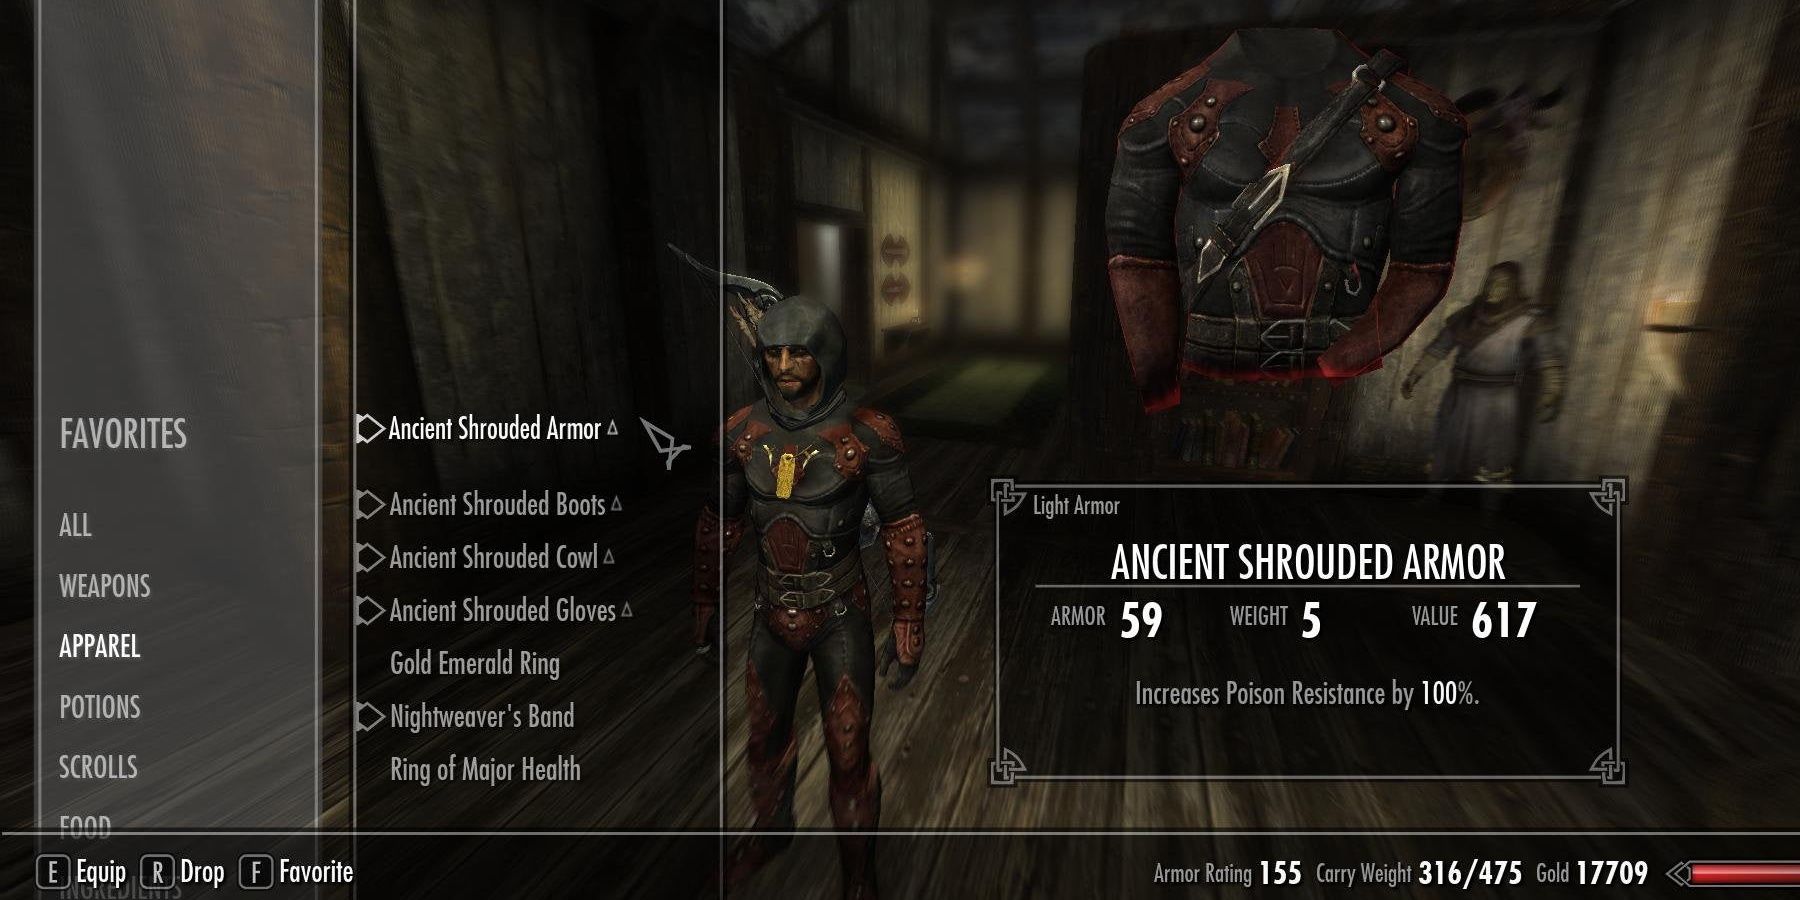 Ancient Shrouded Armor From Skyrim Is Best For Assassins